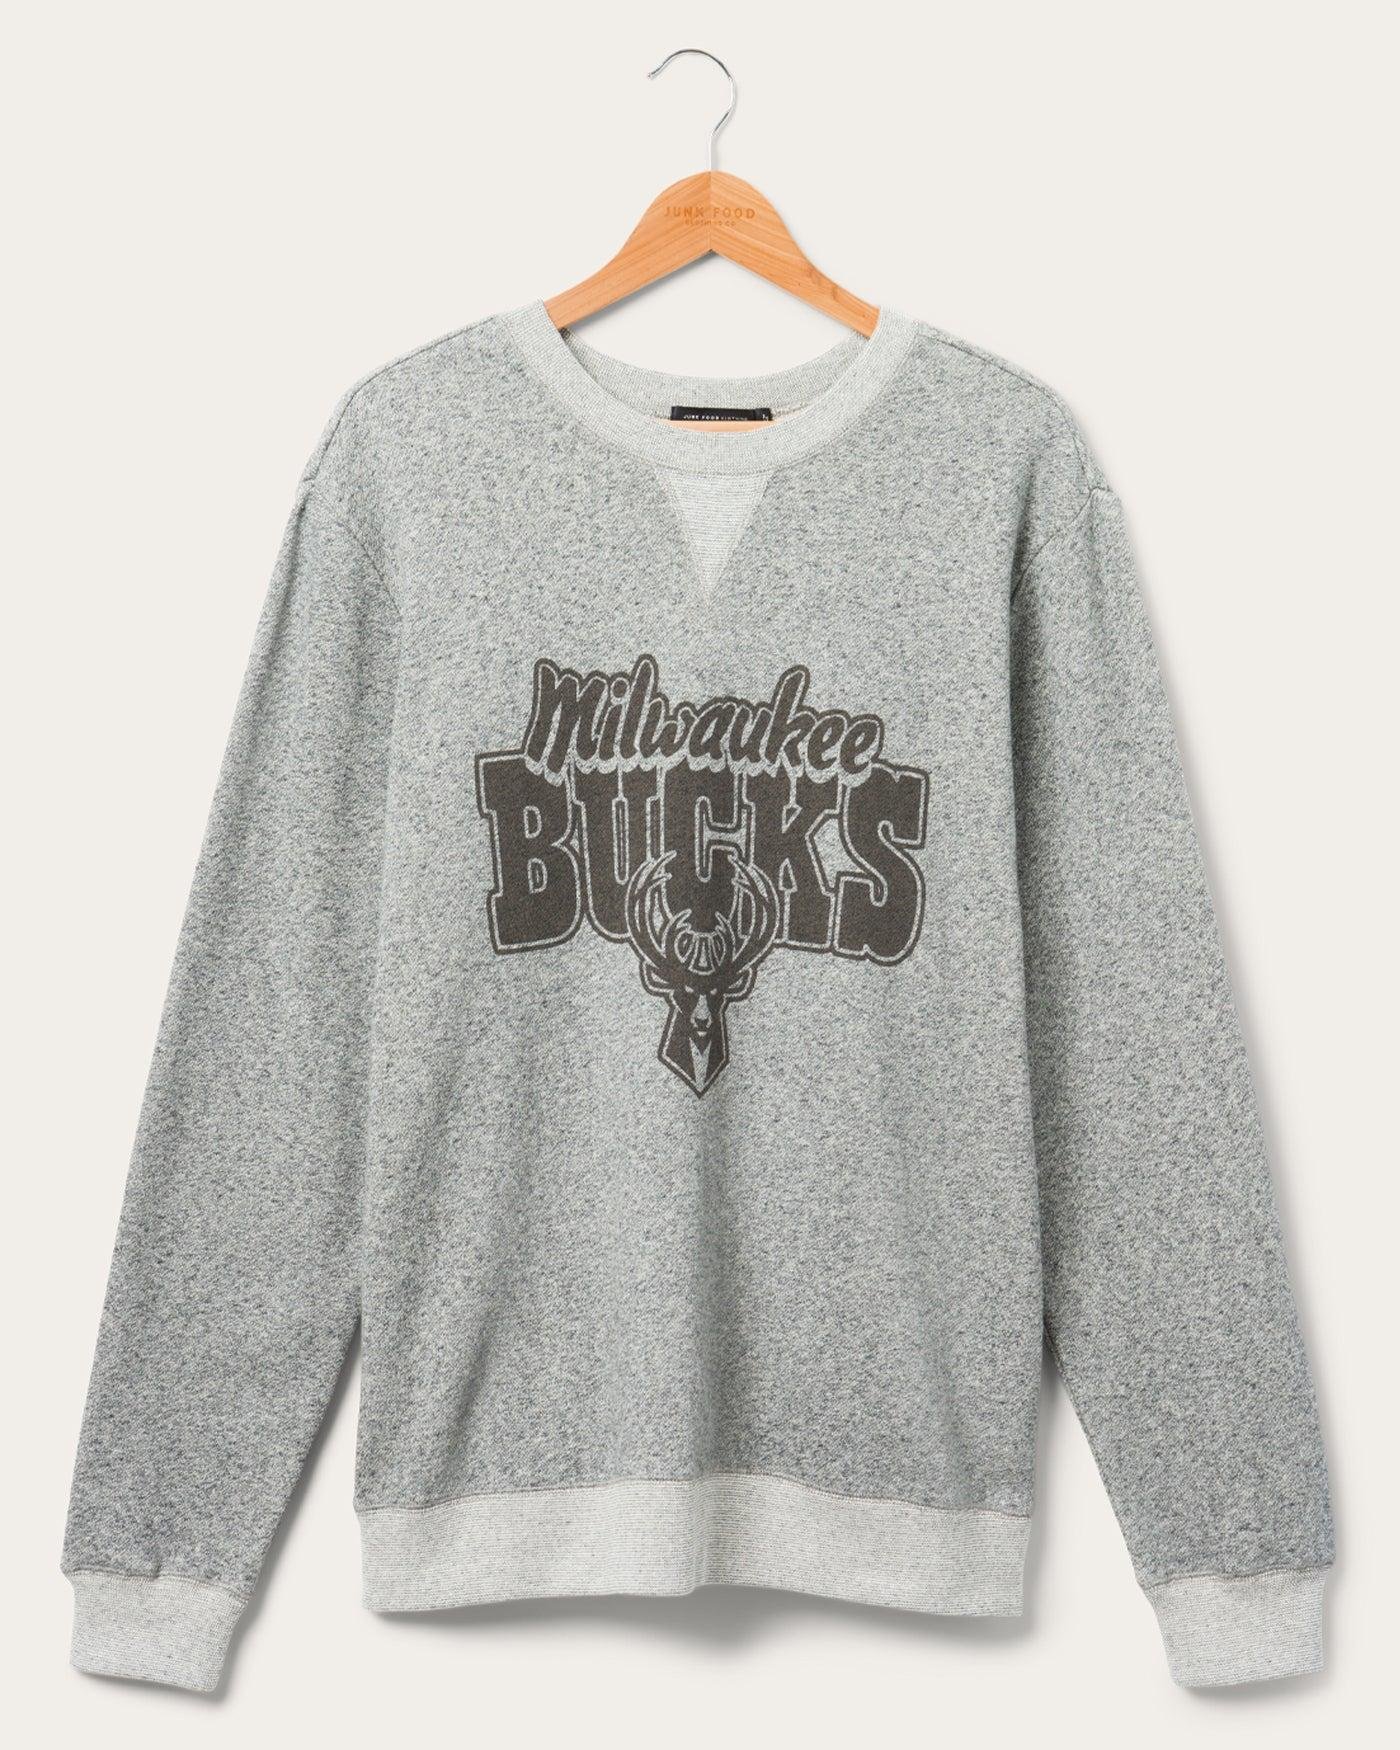 Junk Food Clothing Bucks Formation Fleece Pullover by JUNK FOOD CLOTHING